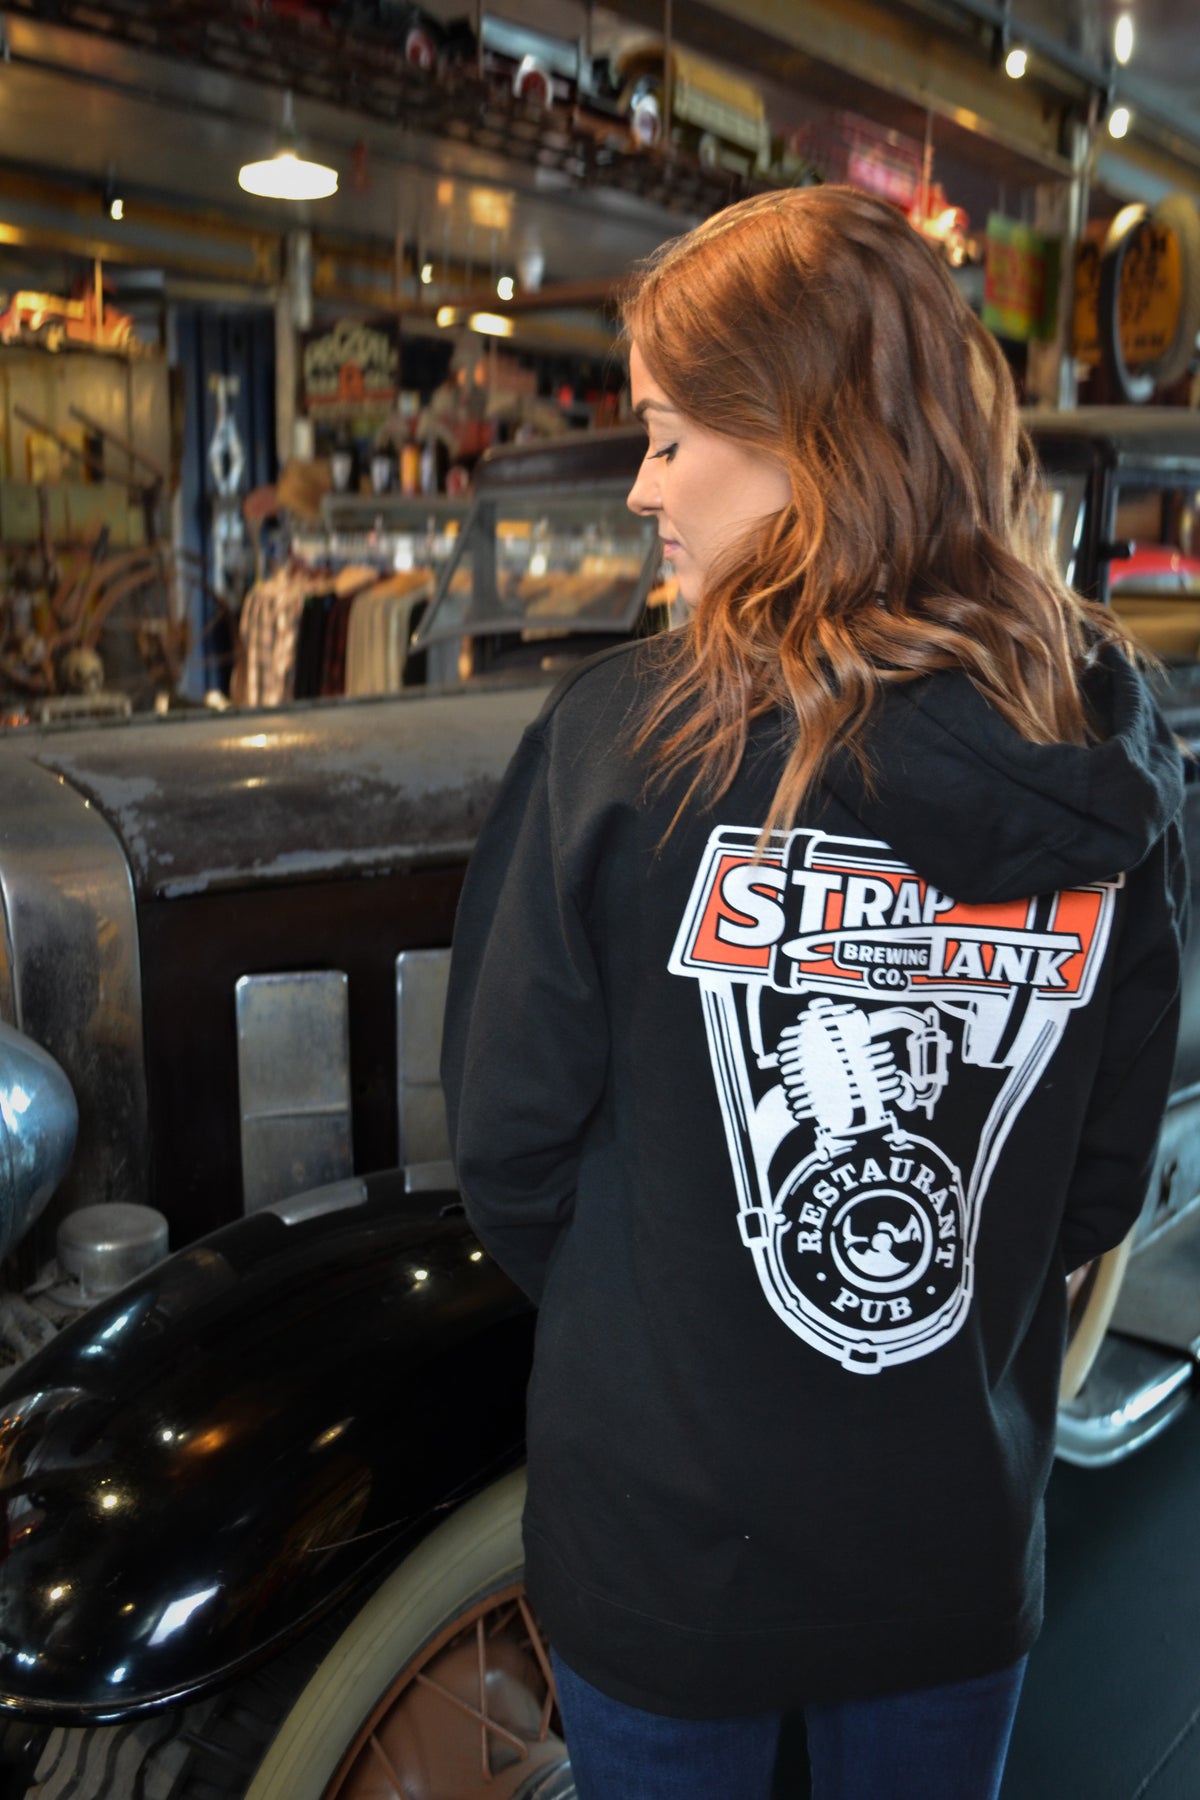 Strap Tank Brewery Pullover Hoodie